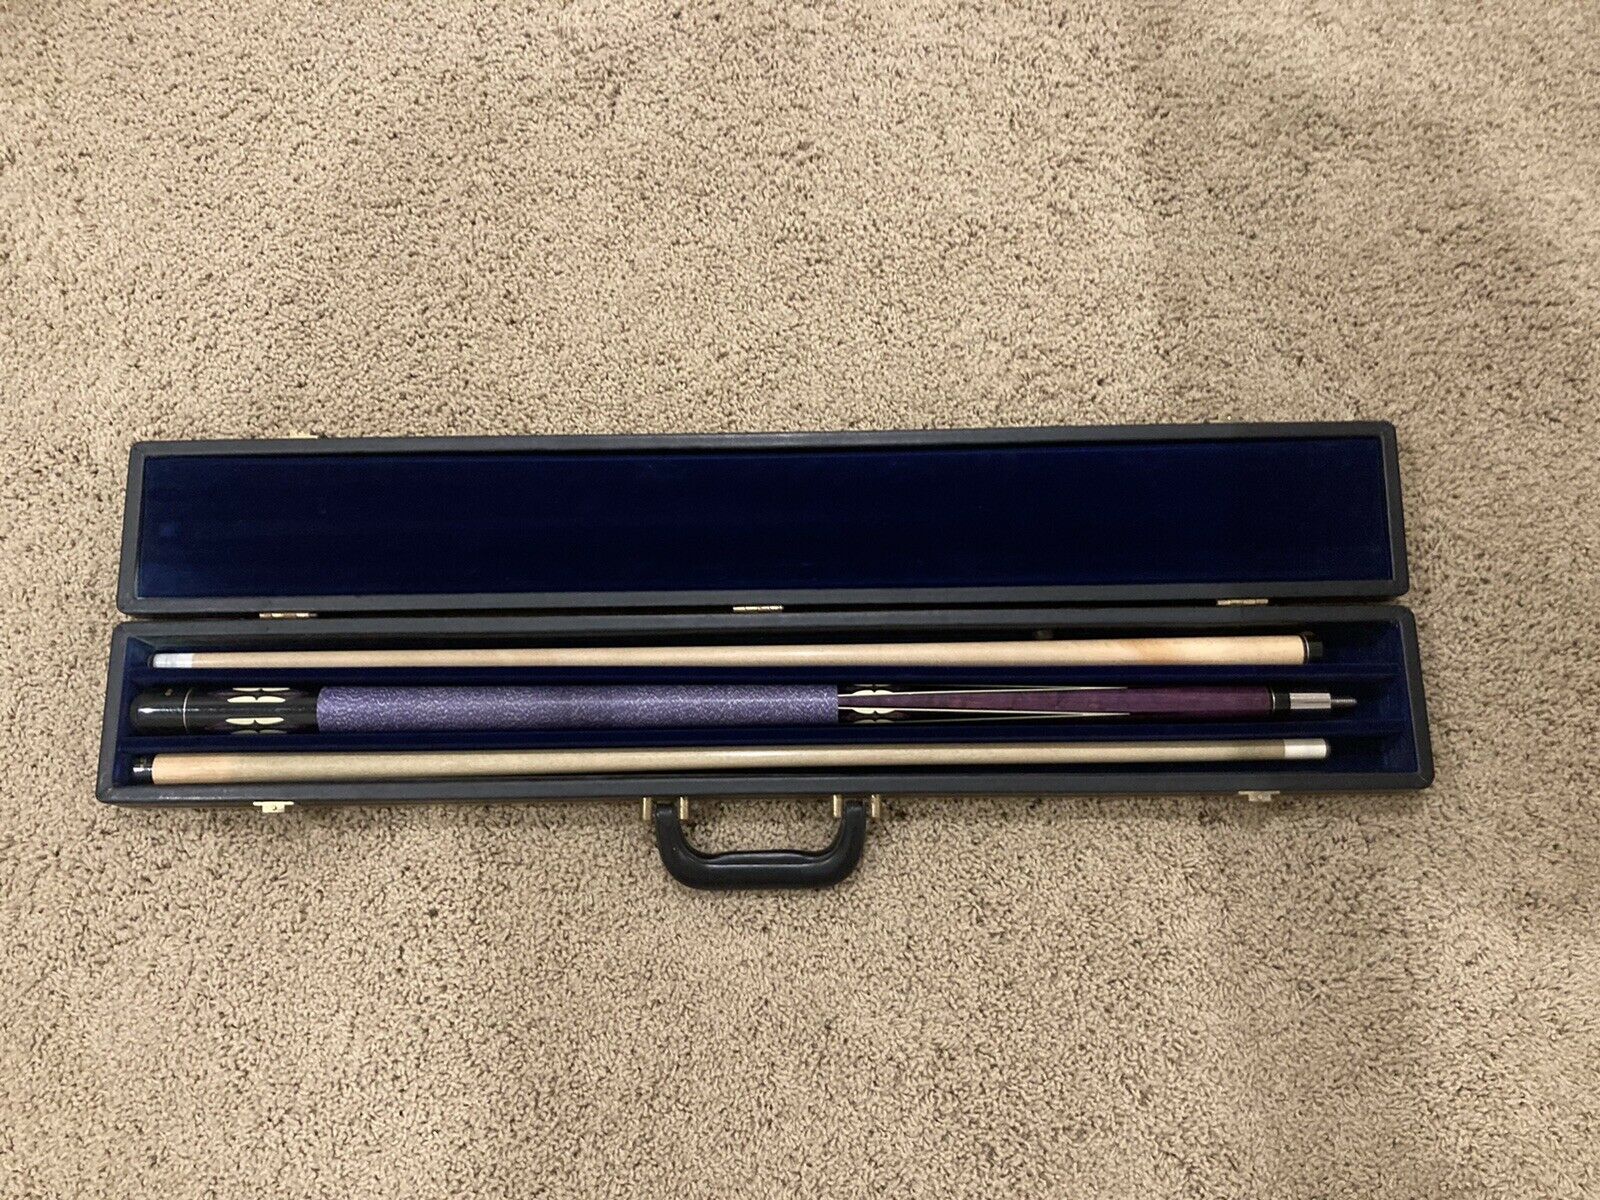 Players Billiards Cue And Cue Case